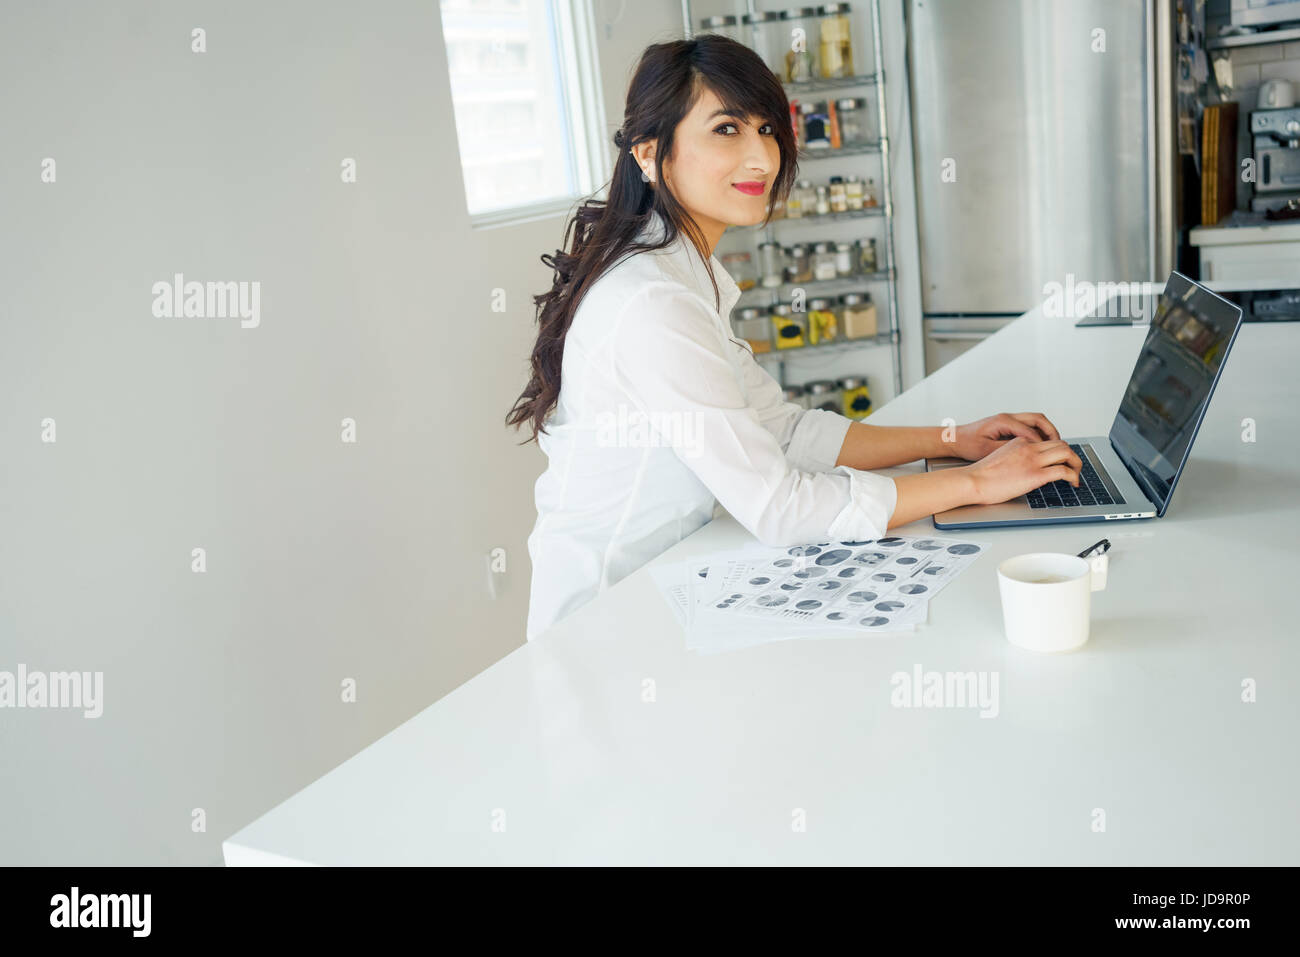 Young woman looking at camera, using laptop in kitchen at home. young adult arabic pretty 20 years old Stock Photo